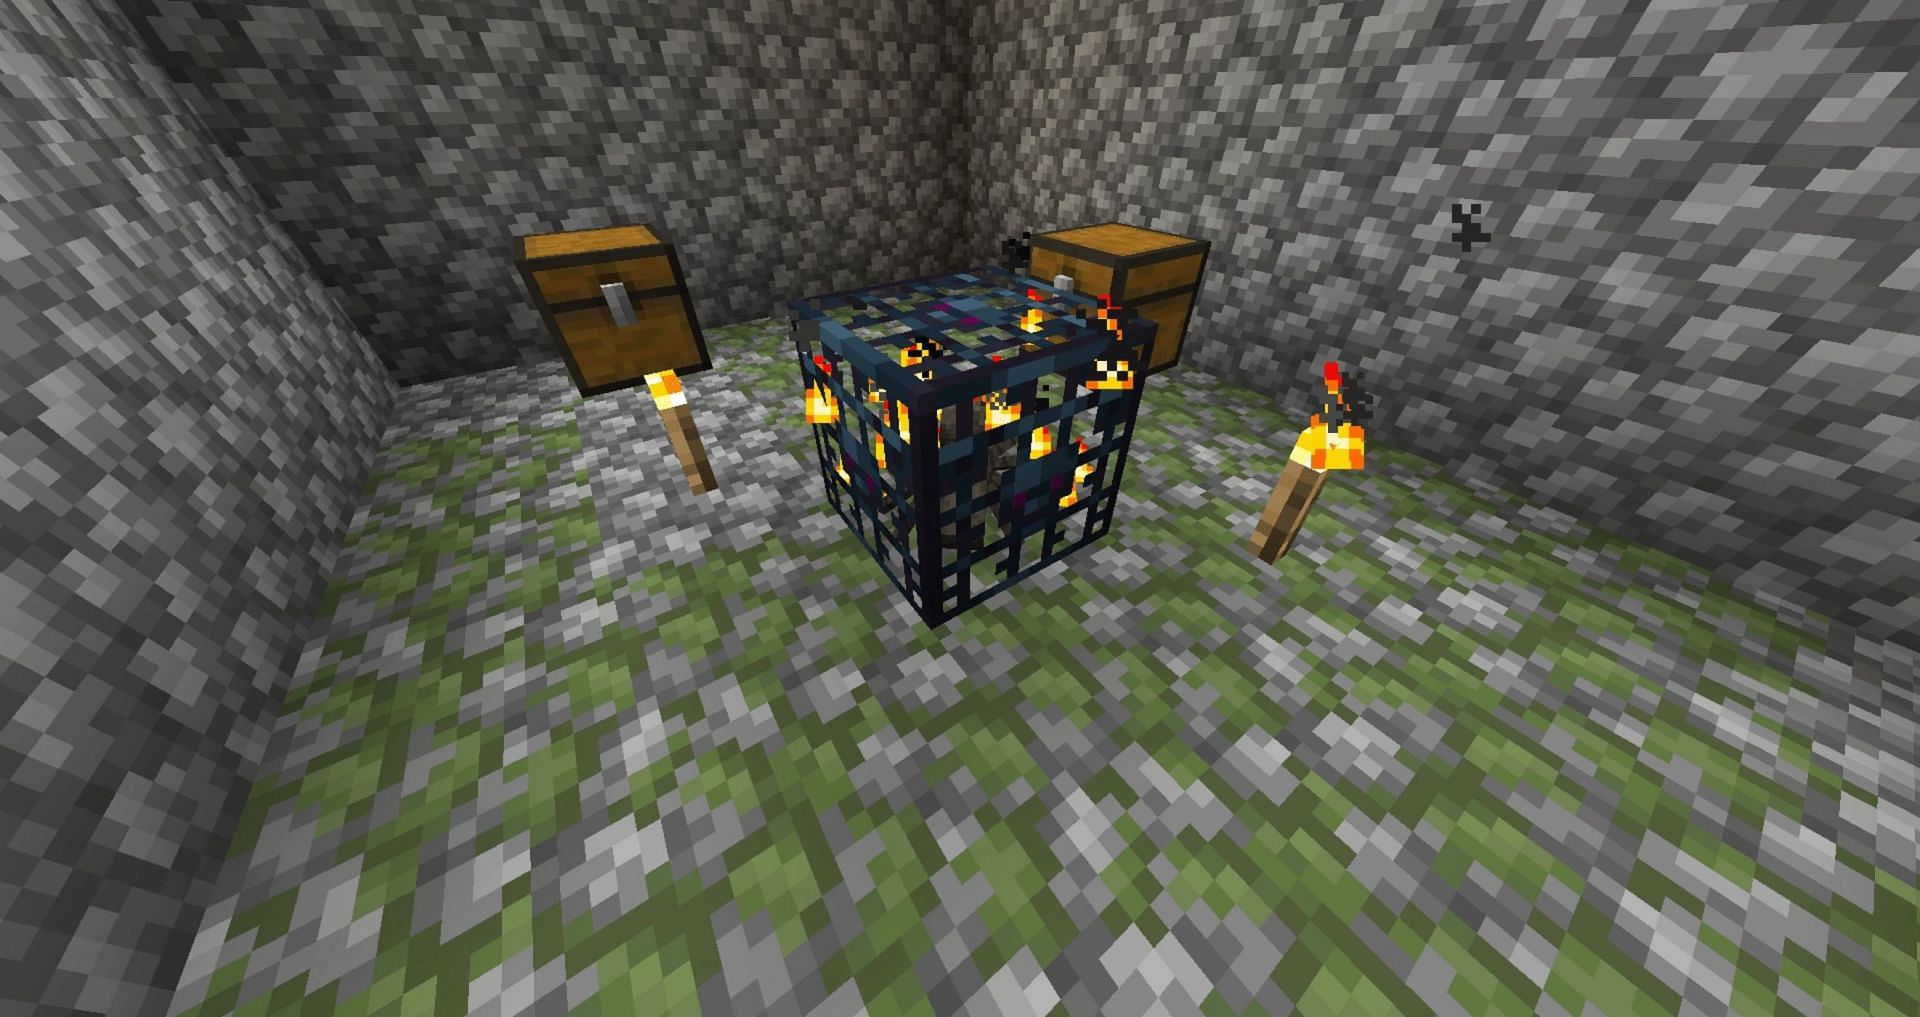 Dungeon spawners are found at the center of the structure (Image via Minecraft Wiki)